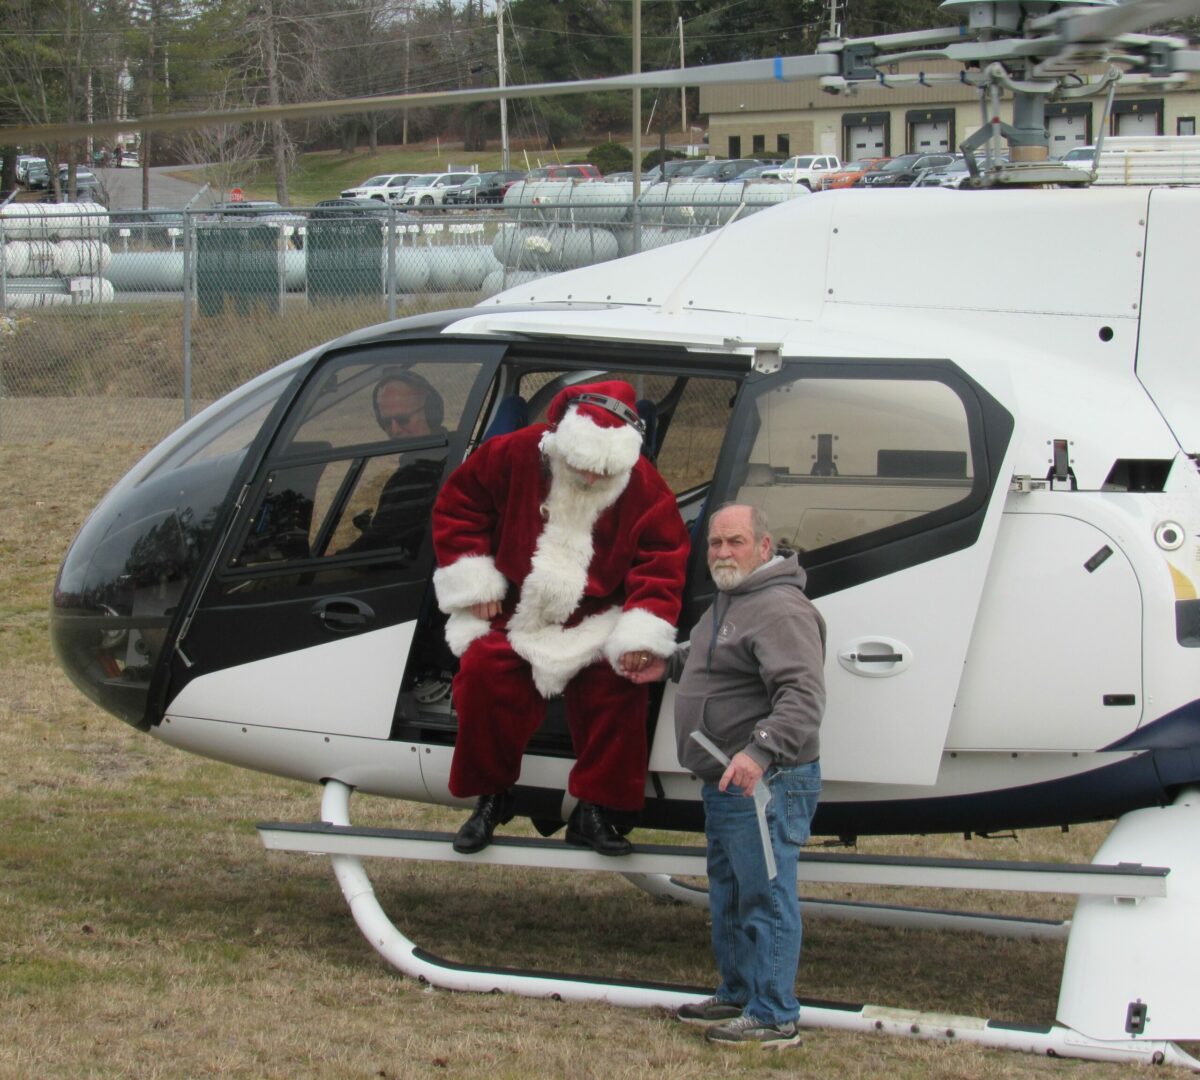 Festive Fun: Santa Lands by Helicopter at Museum